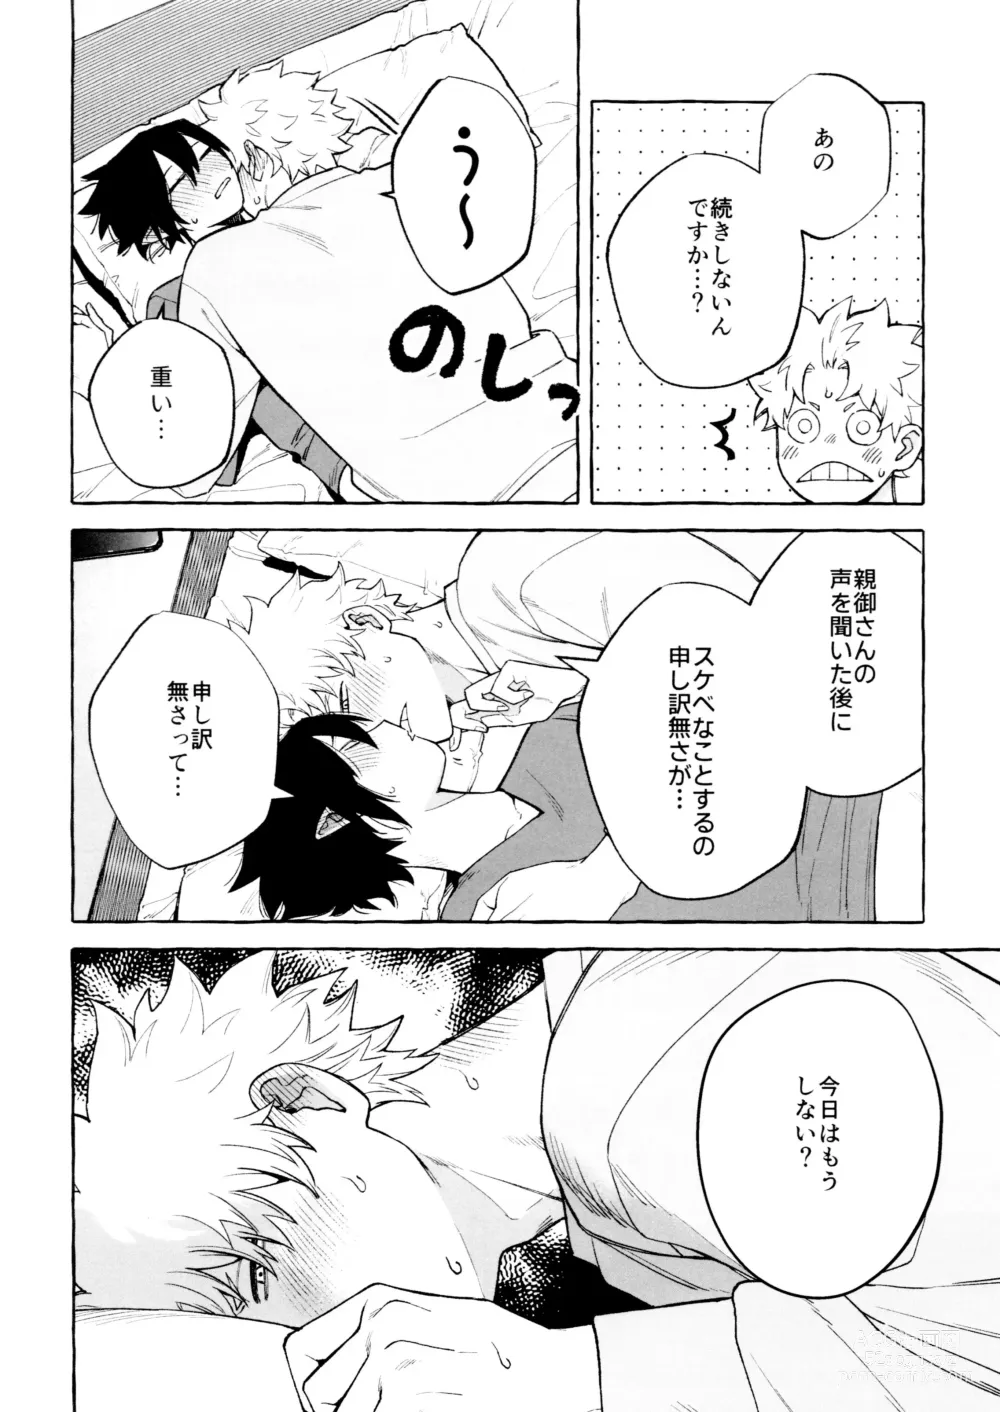 Page 14 of doujinshi Please please